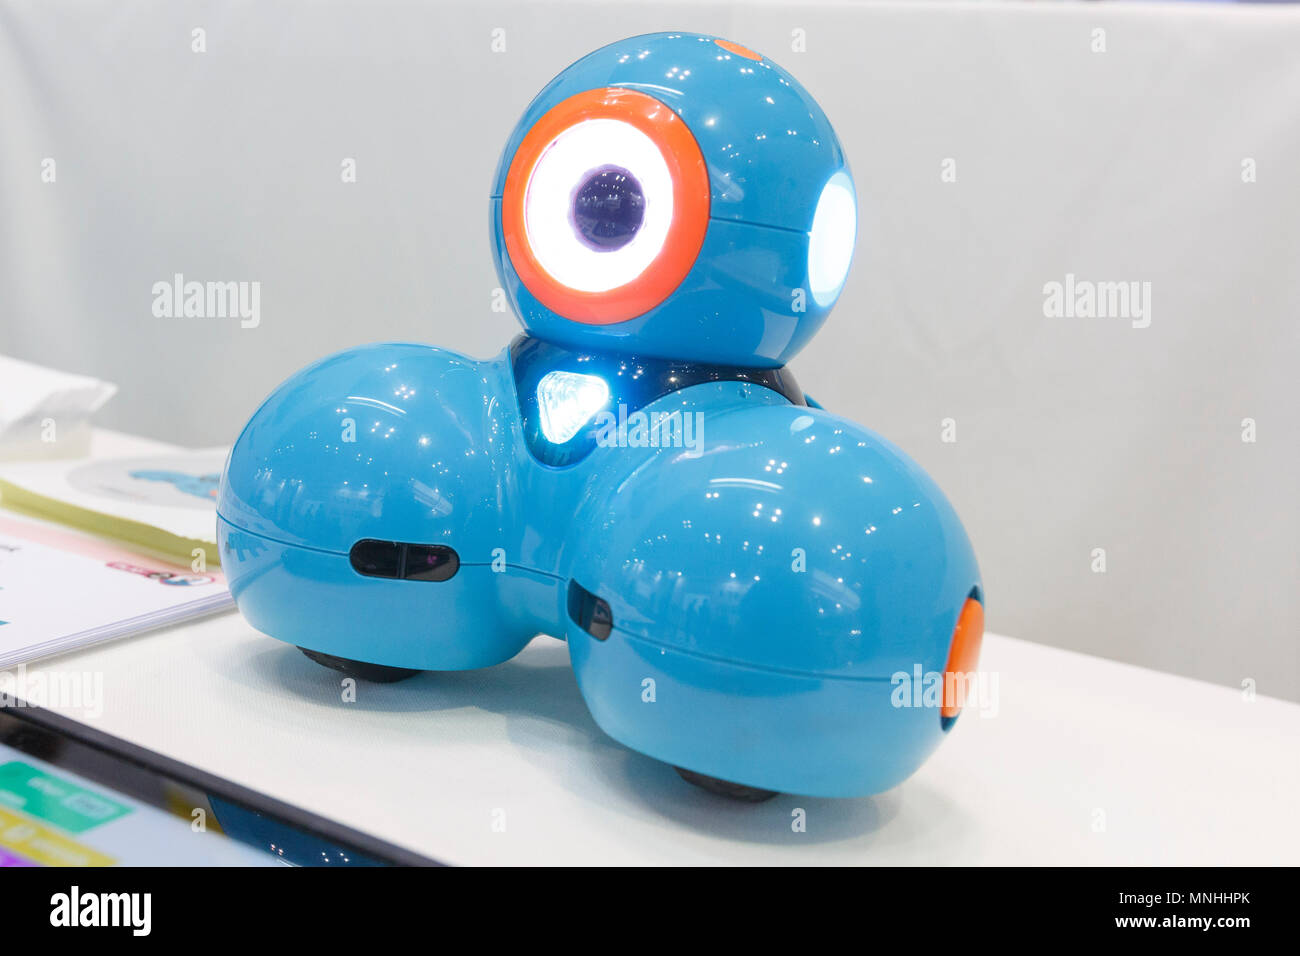 https://c8.alamy.com/comp/MNHHPK/an-educational-robot-dash-on-display-during-the-educational-it-solutions-expo-edix-at-tokyo-big-sight-on-may-17-2018-tokyo-japan-this-year-japans-largest-educational-it-trade-show-attracted-700-companies-specializing-in-educational-contents-technologies-and-services-for-educational-field-seeking-an-opportunity-to-expand-their-business-in-japan-organizers-claim-that-35000-visitors-attended-the-three-day-exhibition-from-may-16-to-18-credit-rodrigo-reyes-marinafloalamy-live-news-MNHHPK.jpg